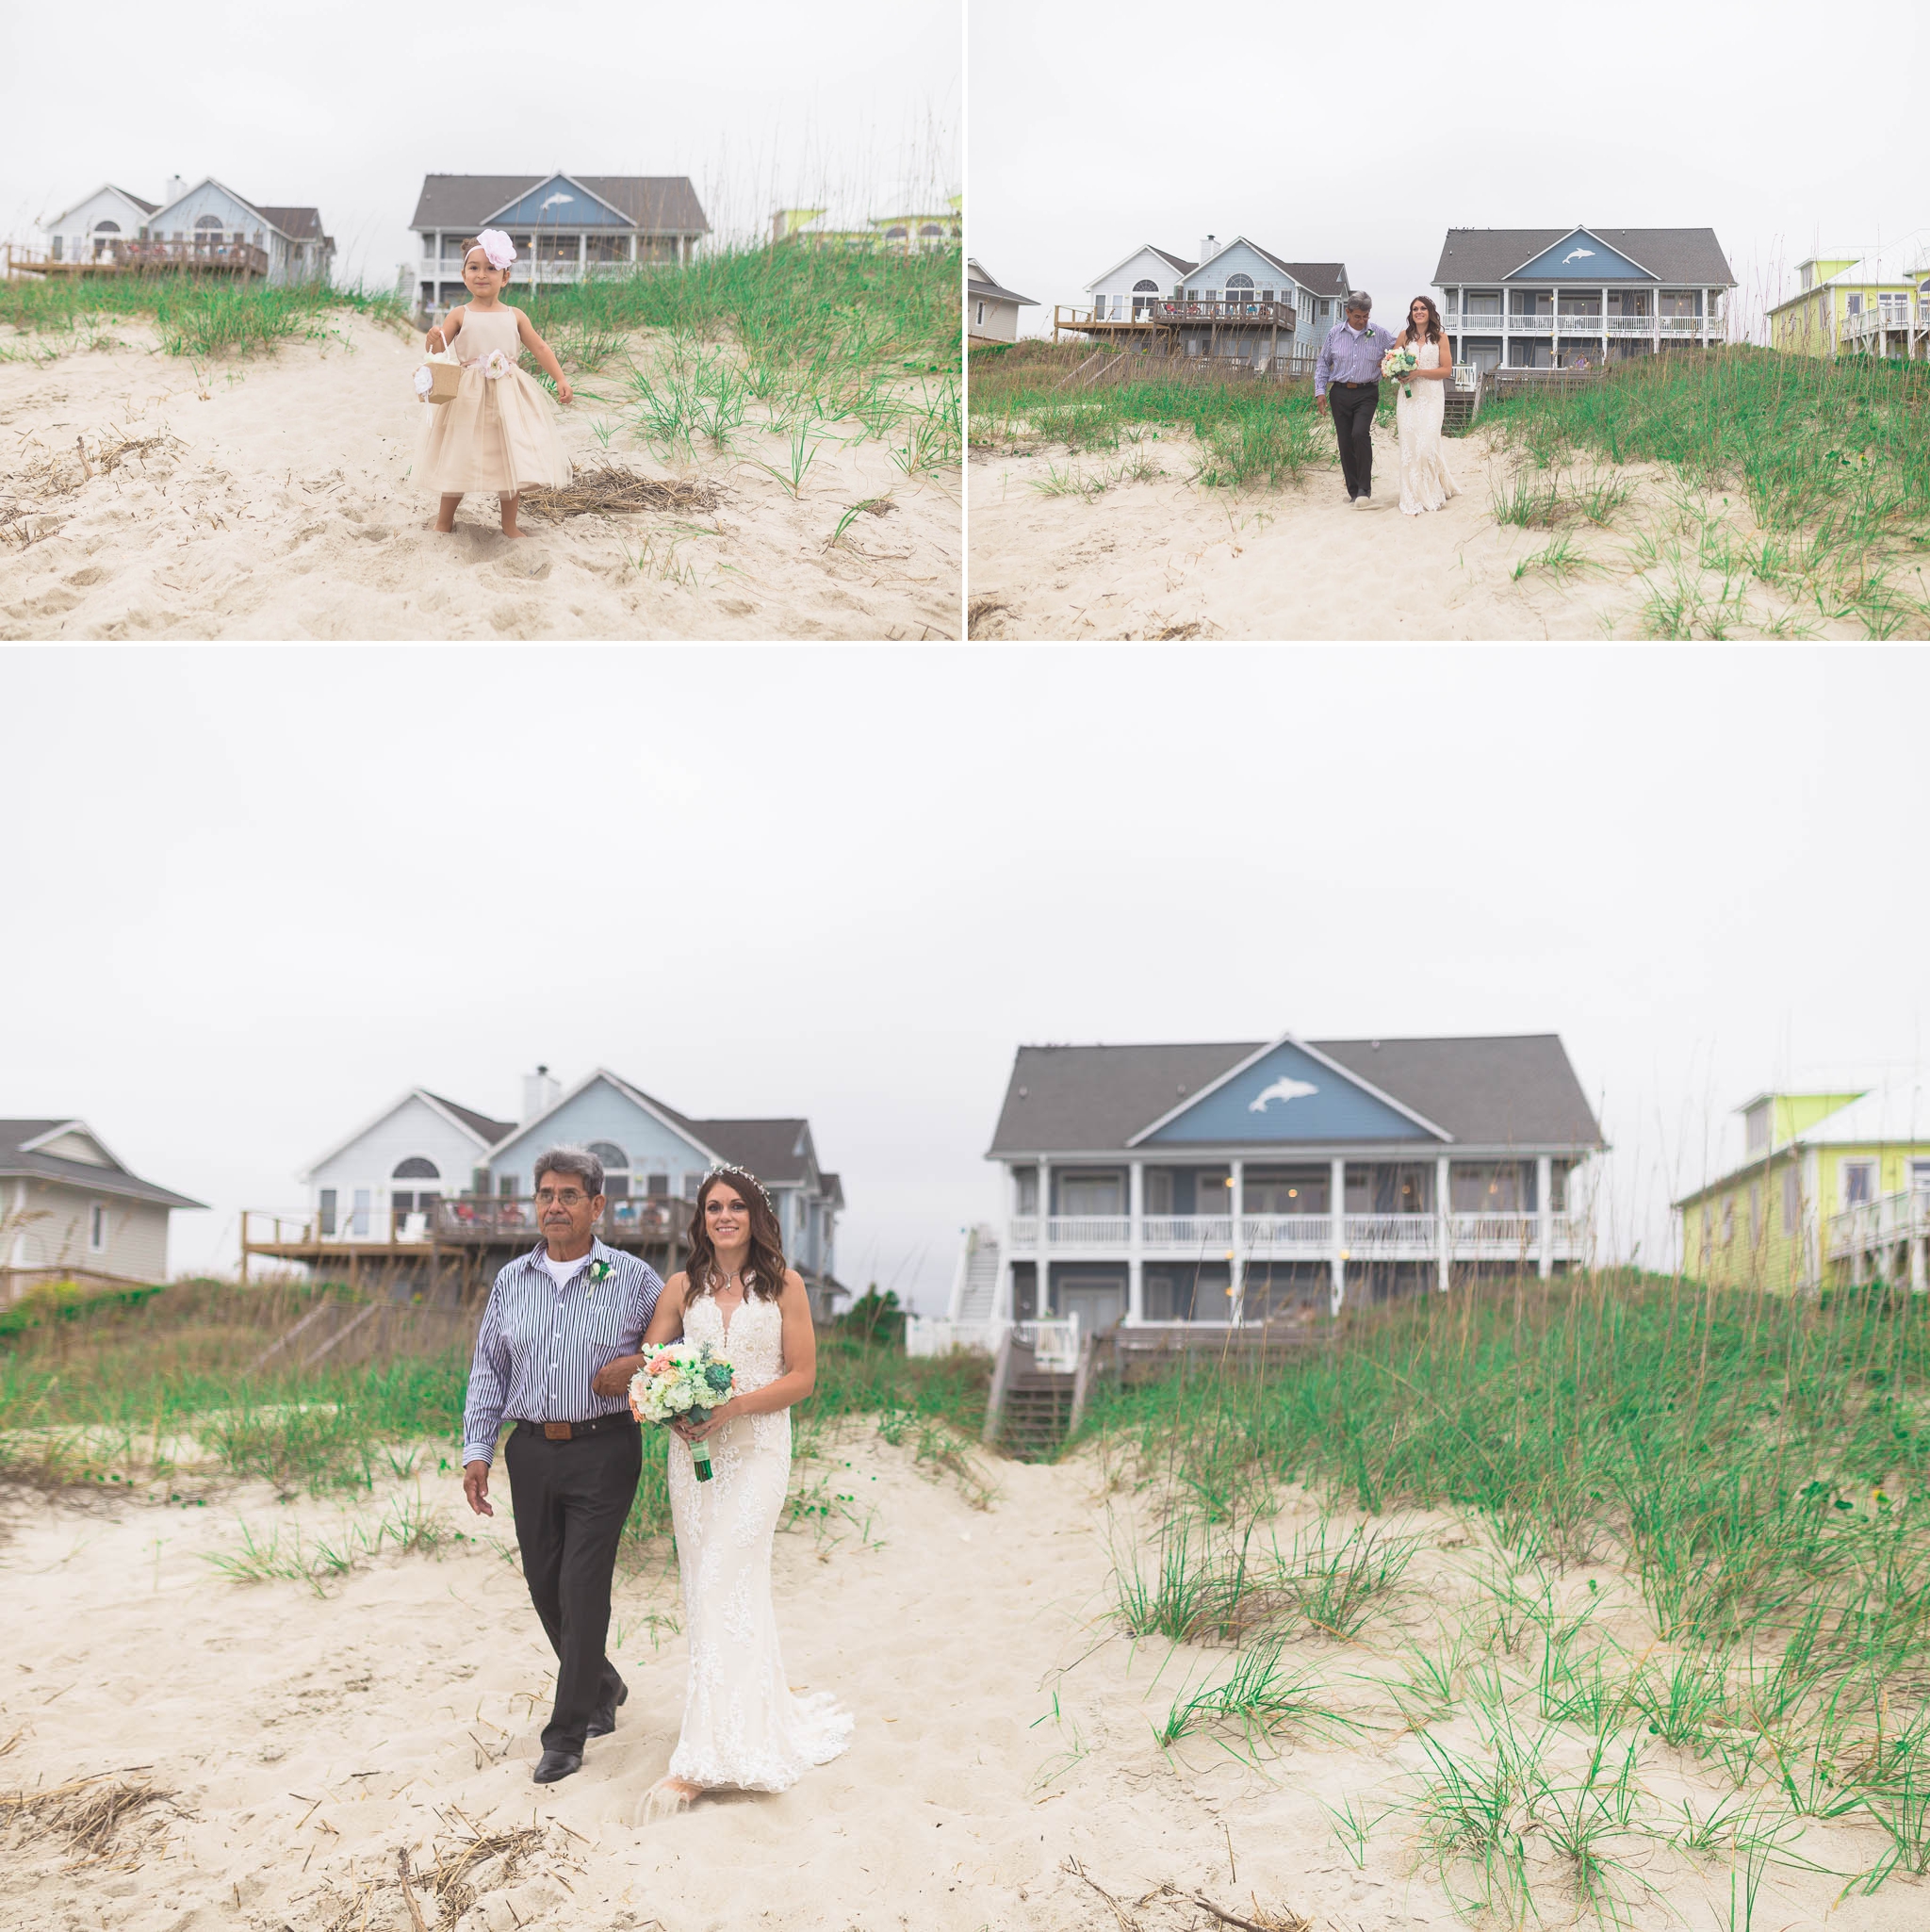 Rena + Aaron Wedding Photography at 1 Impossible Dream in Emerald Isle North Carolina - Outer Banks Photographer 